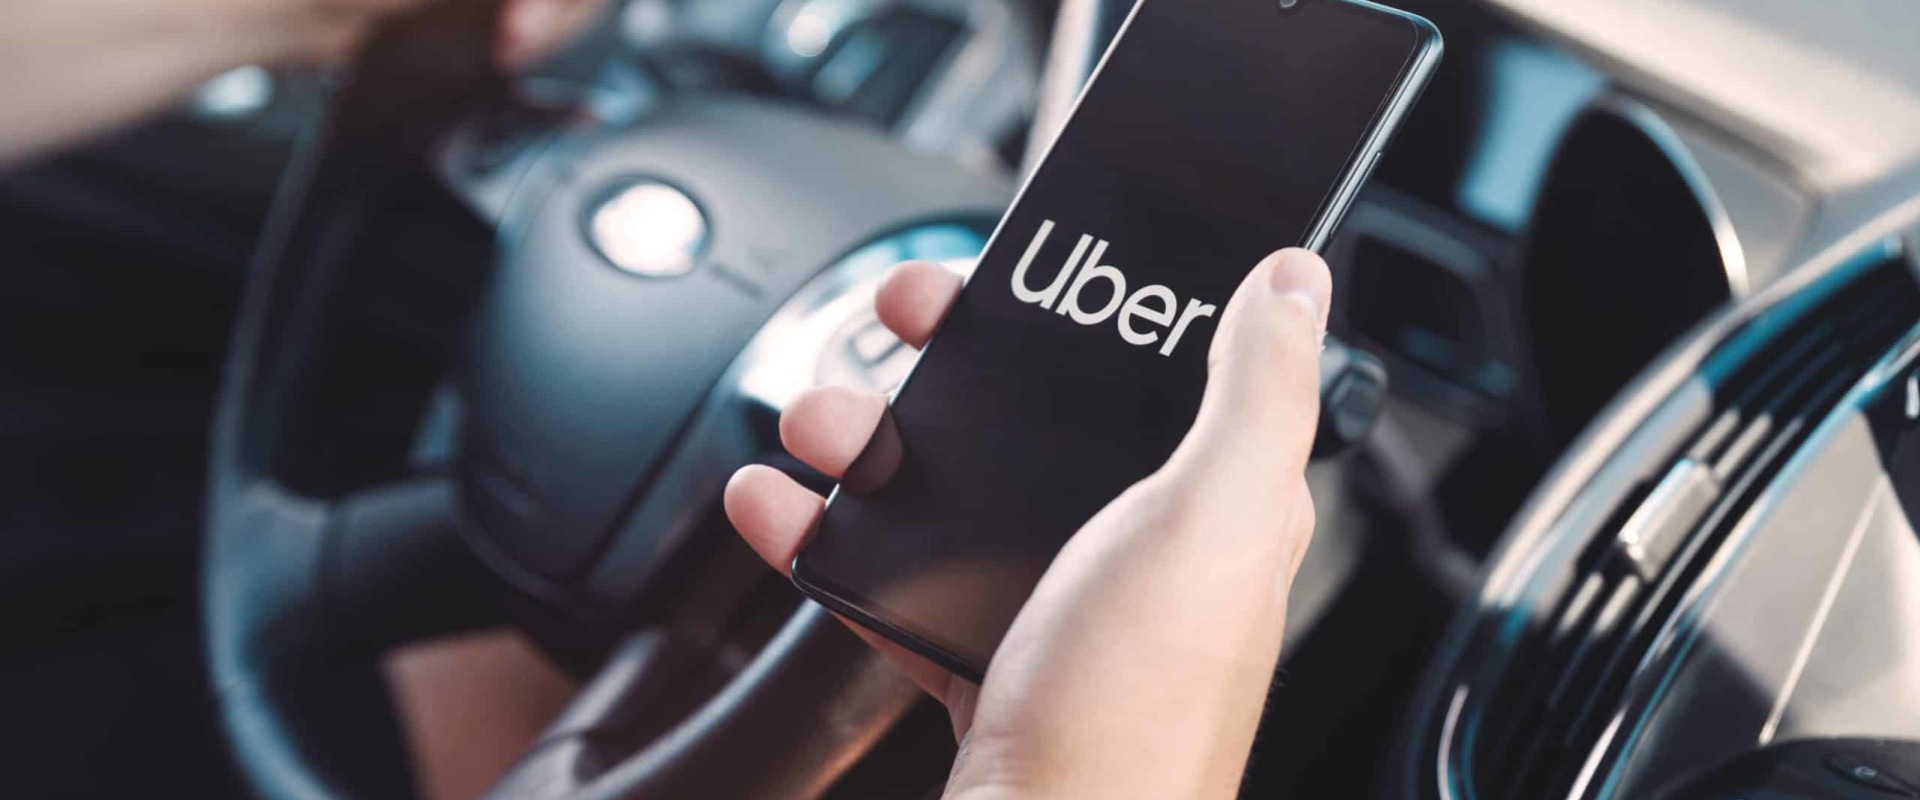 How to File an Uber Accident Claim in Arizona